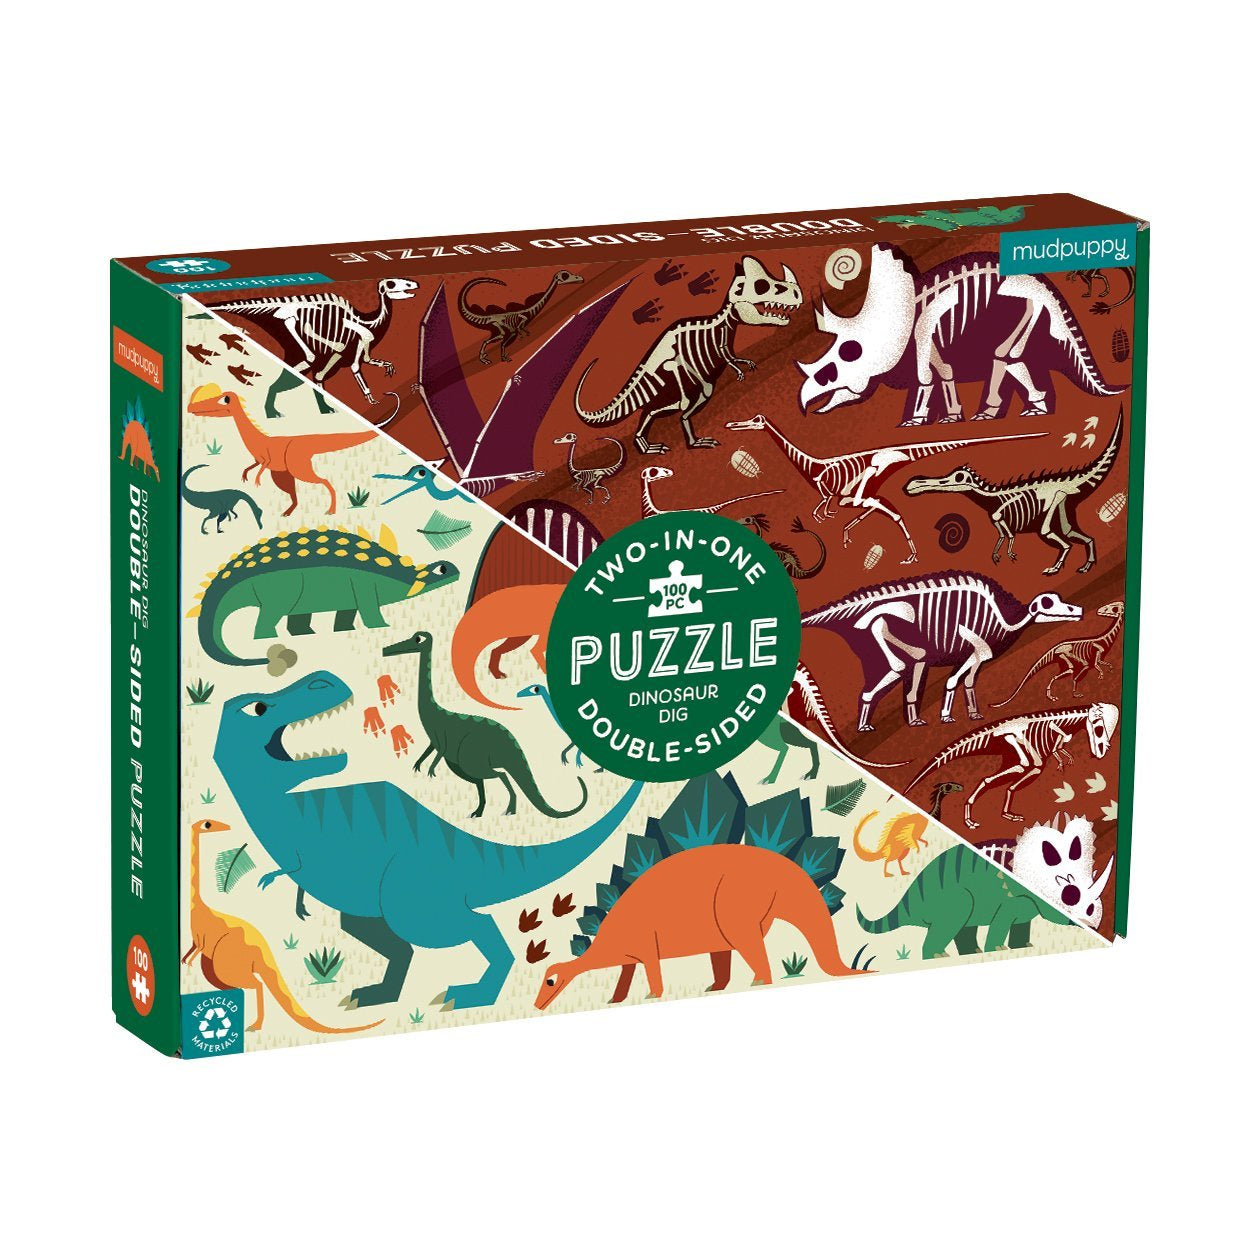 Mudpuppy 100 Pc Double-Sided Puzzle - Dinosaur Dig